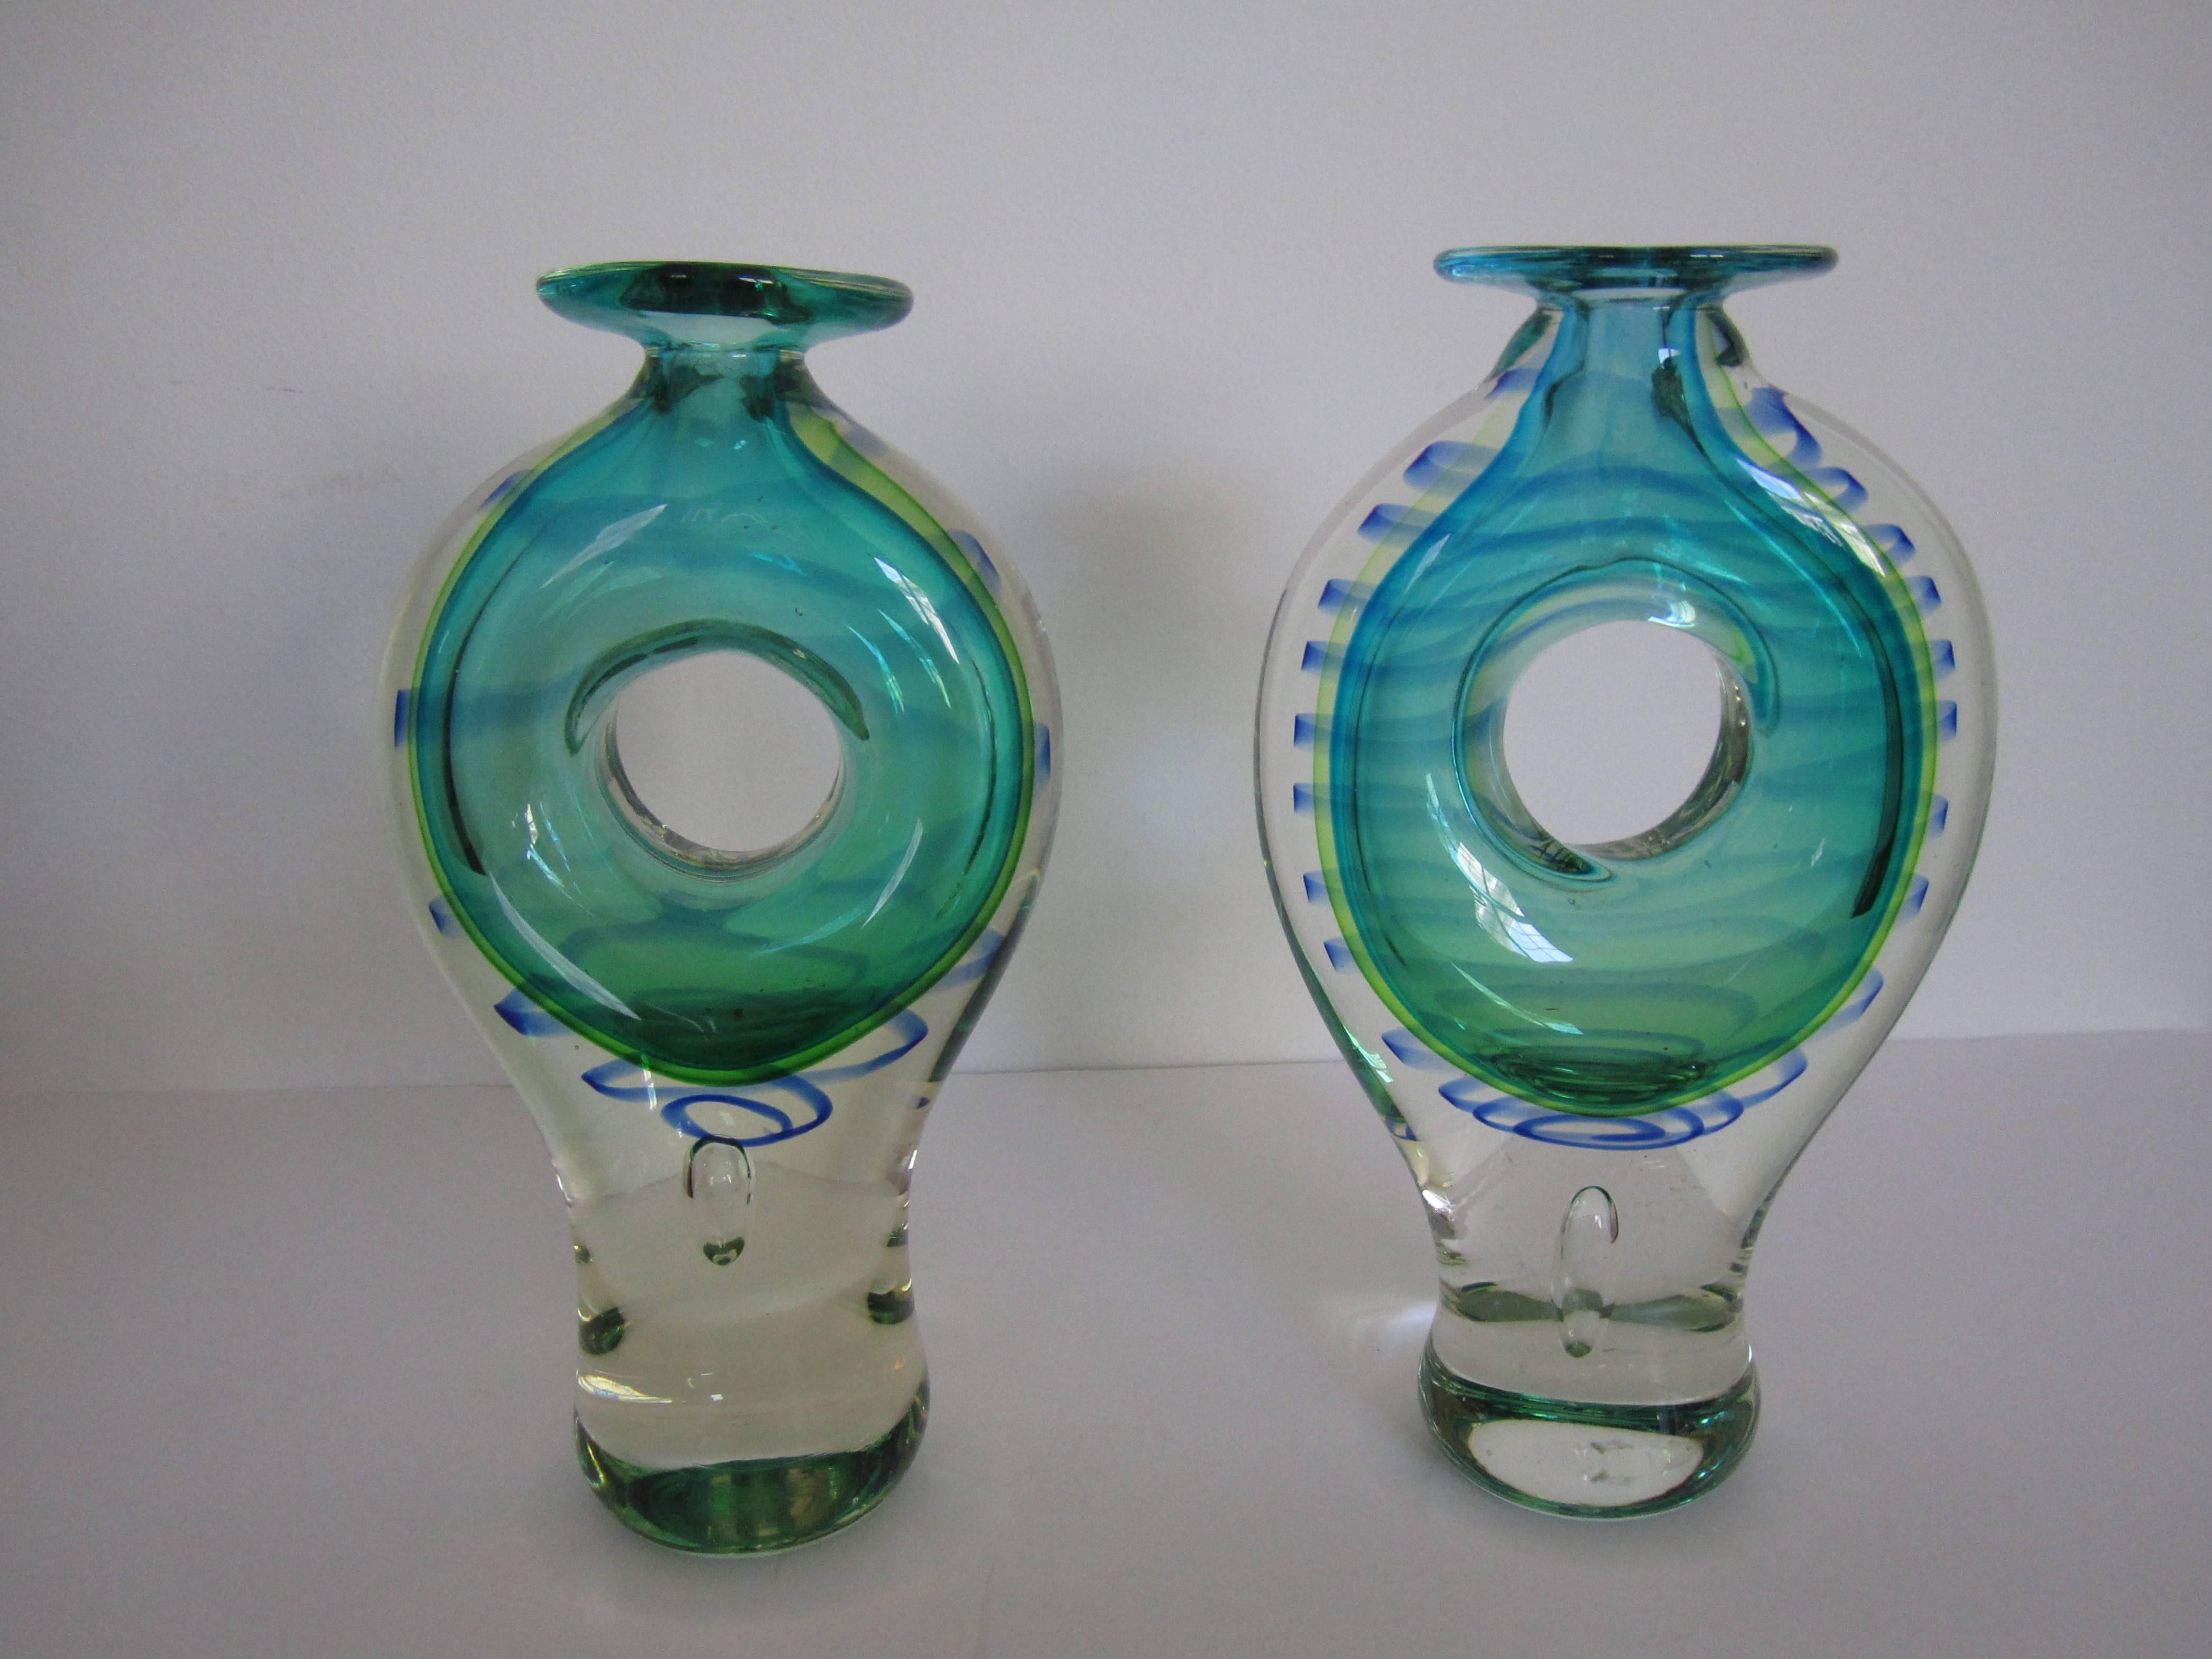 Unknown Pair of Modern Blue and Green Art Glass Vessels or Vases